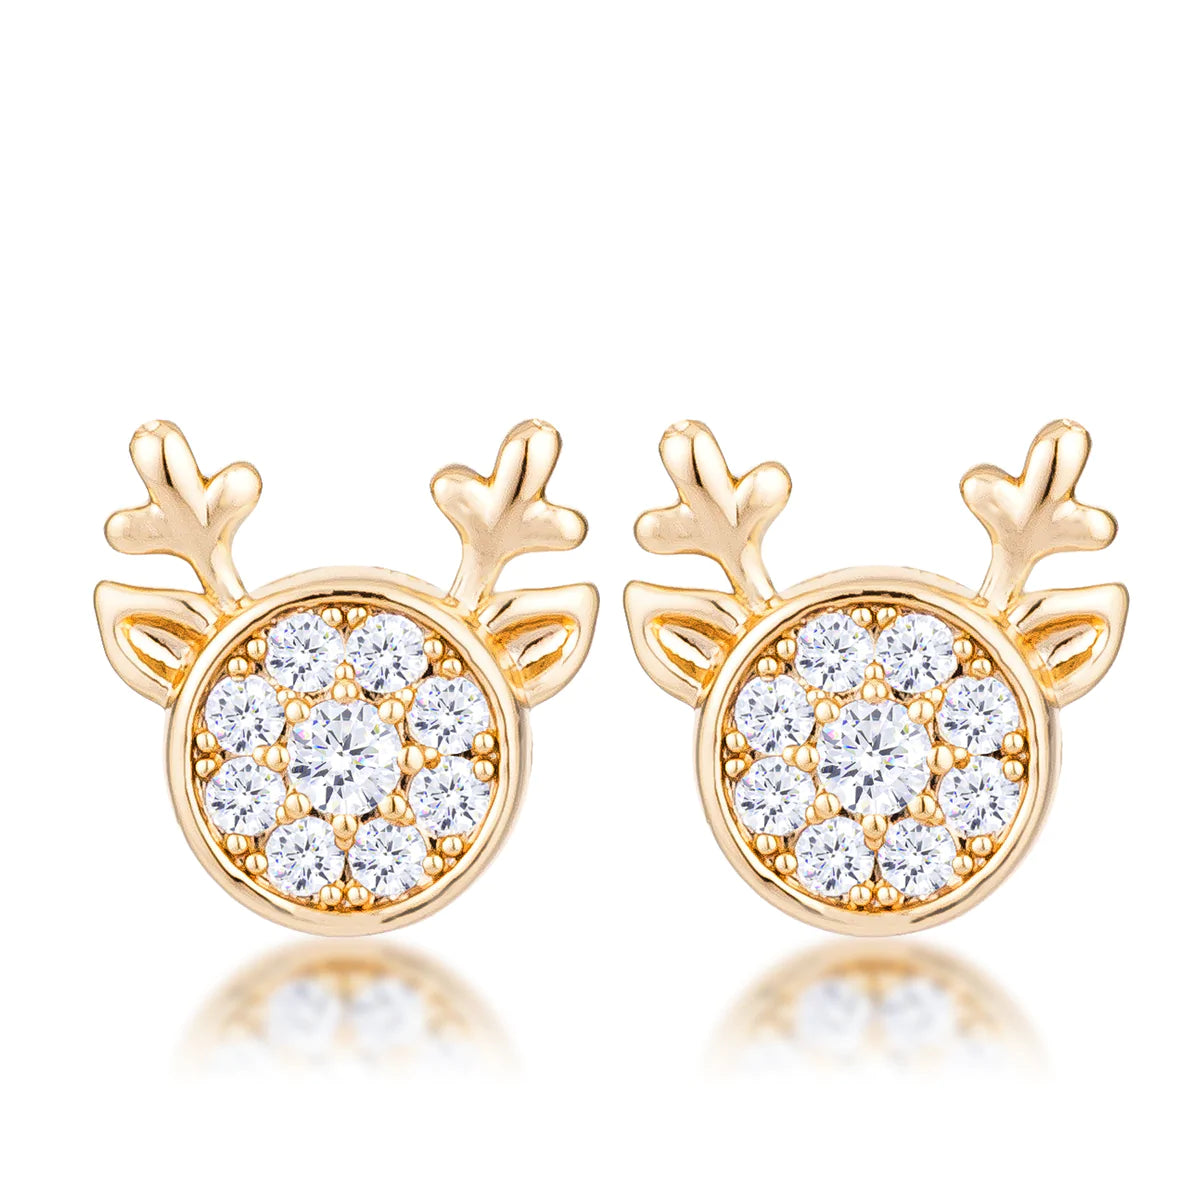 USA IMPORT Gold Plated Clear CZ Reindeer Earrings - LS E50206G-C01